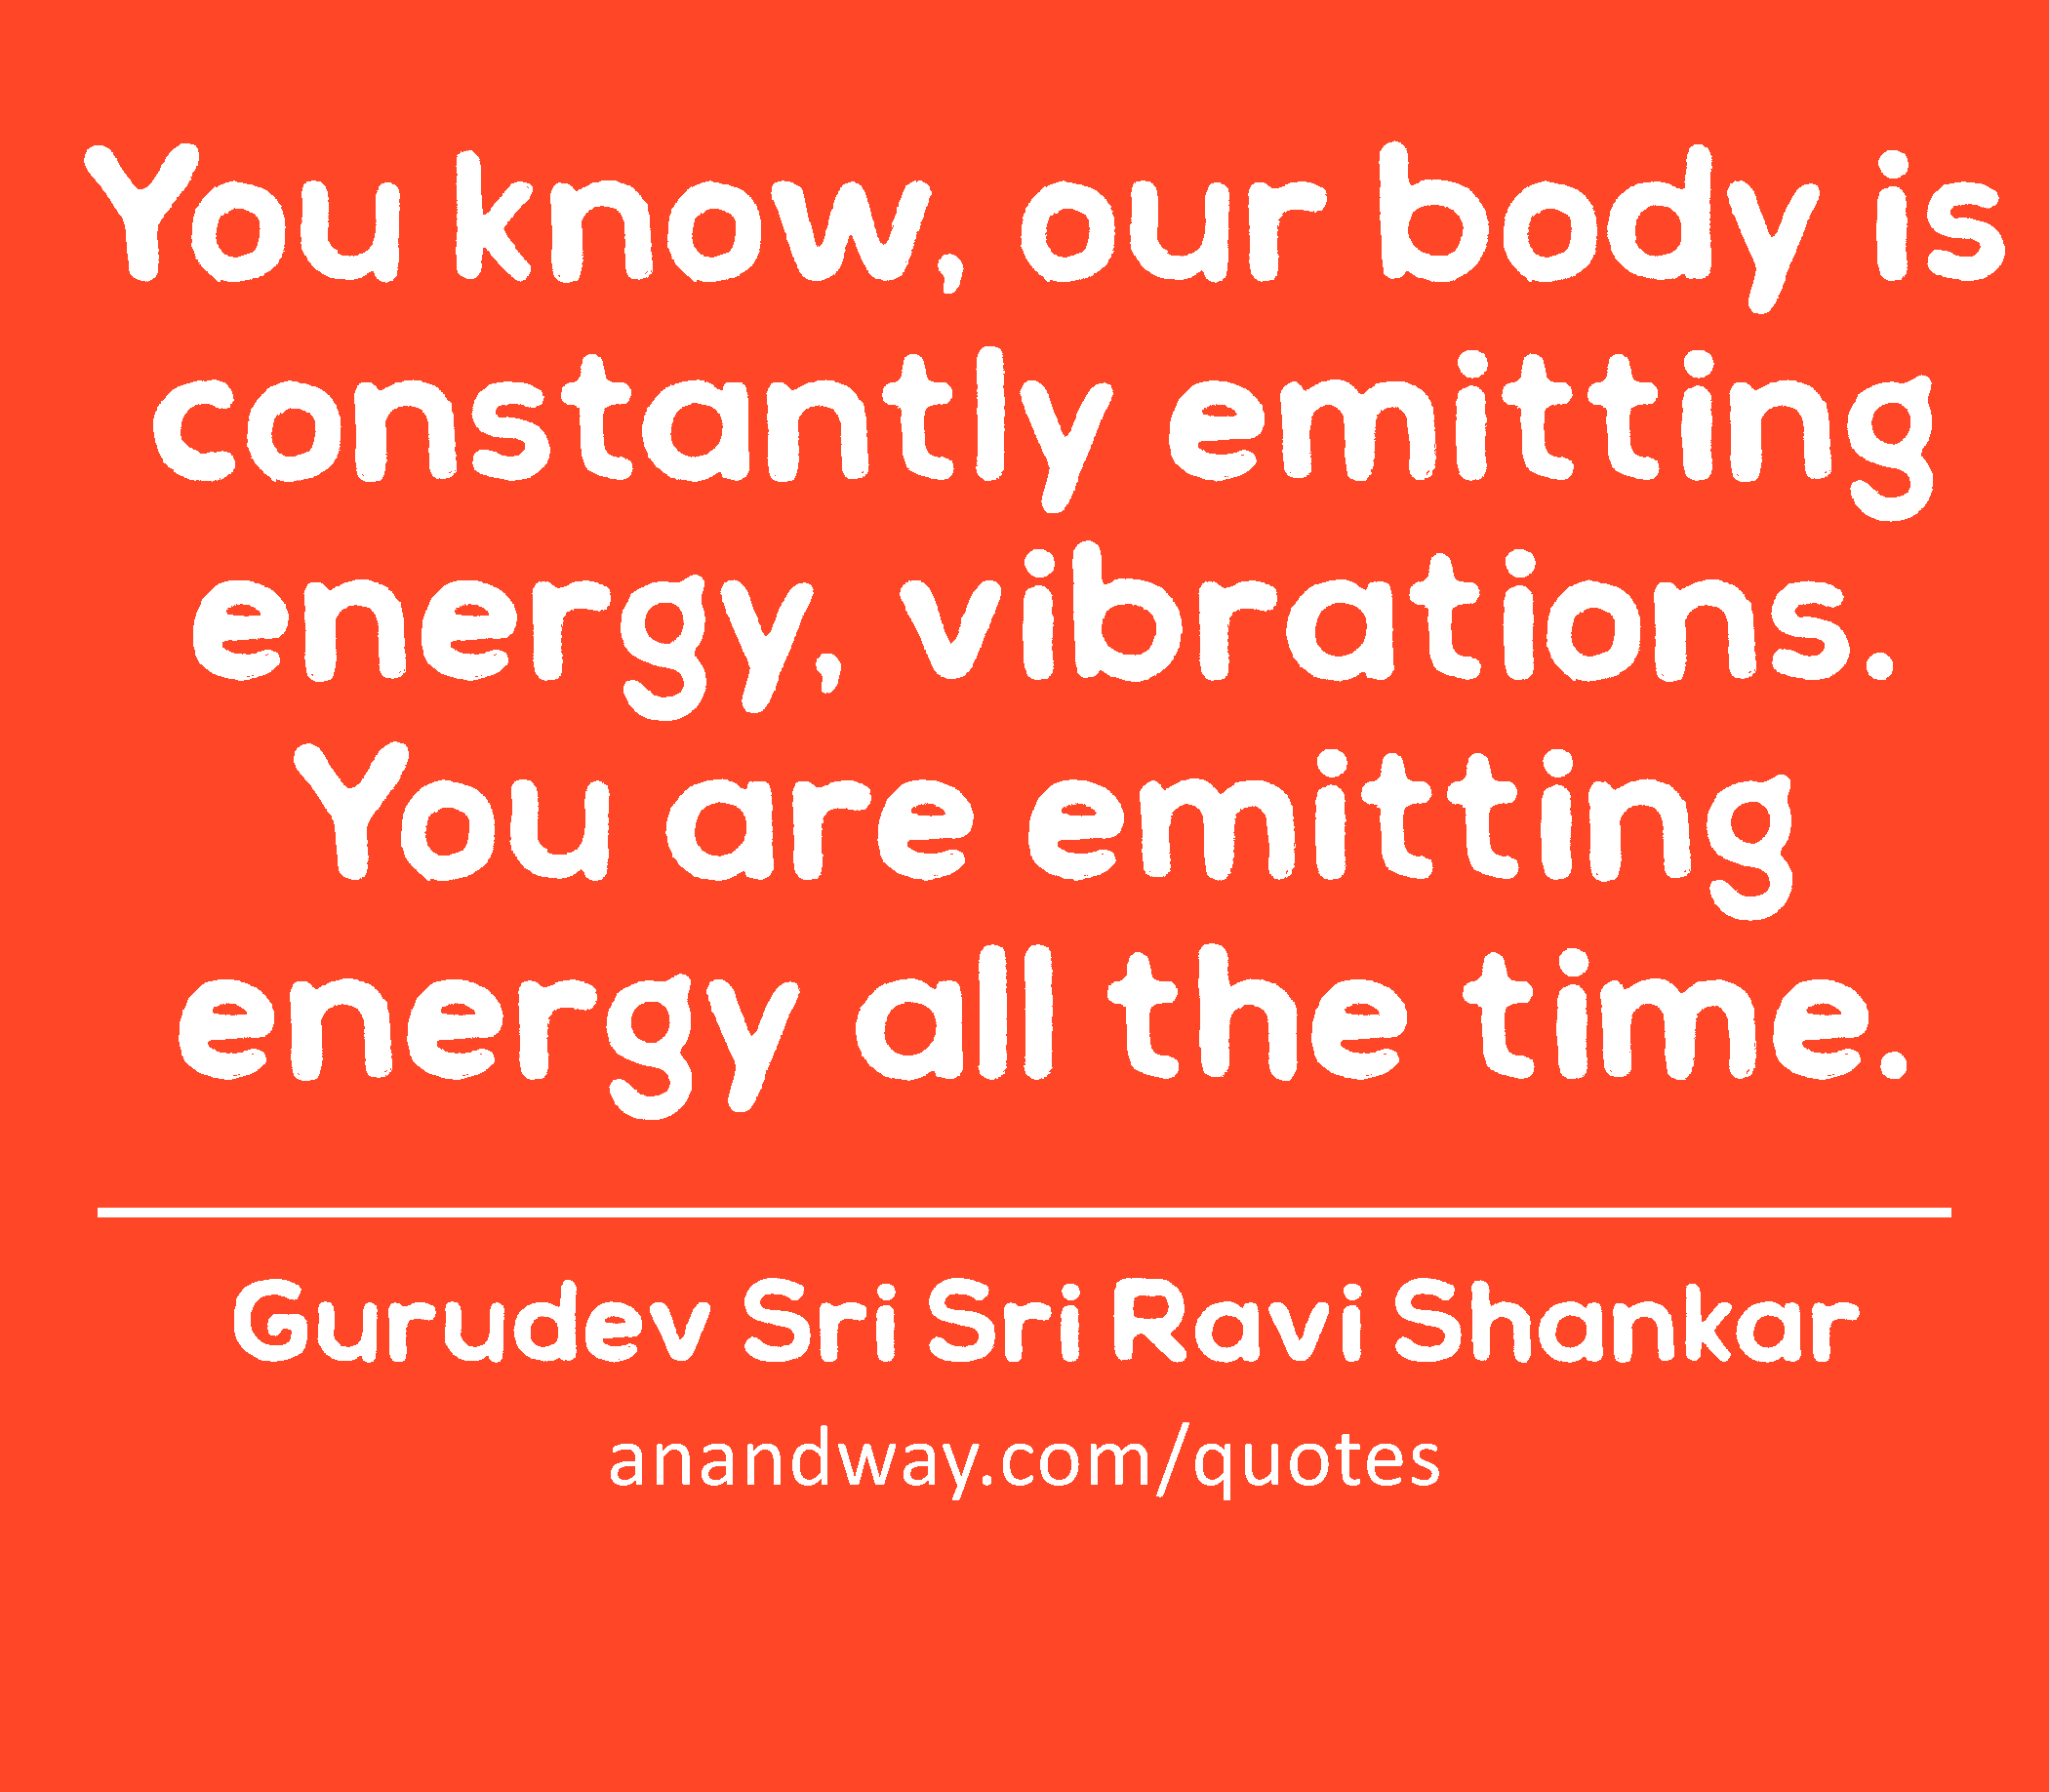 You know, our body is constantly emitting energy, vibrations. You are emitting energy all the time.
 -Gurudev Sri Sri Ravi Shankar